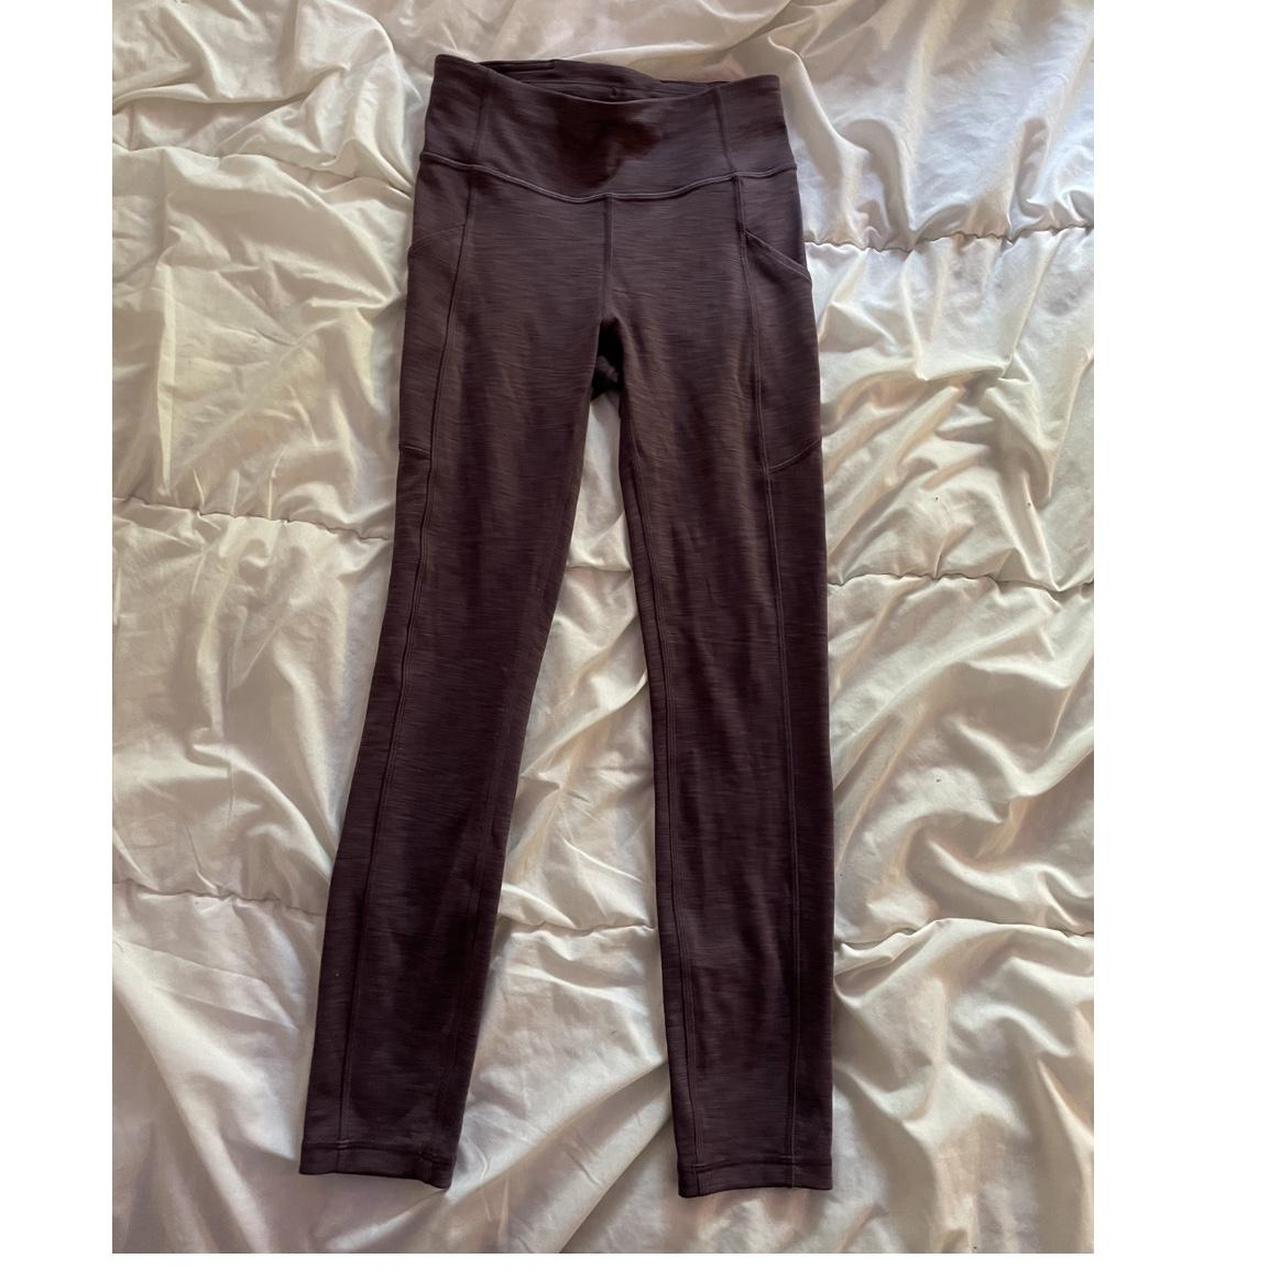 Lululemon size 8 pants. Mauve speckled joggers with pockets are